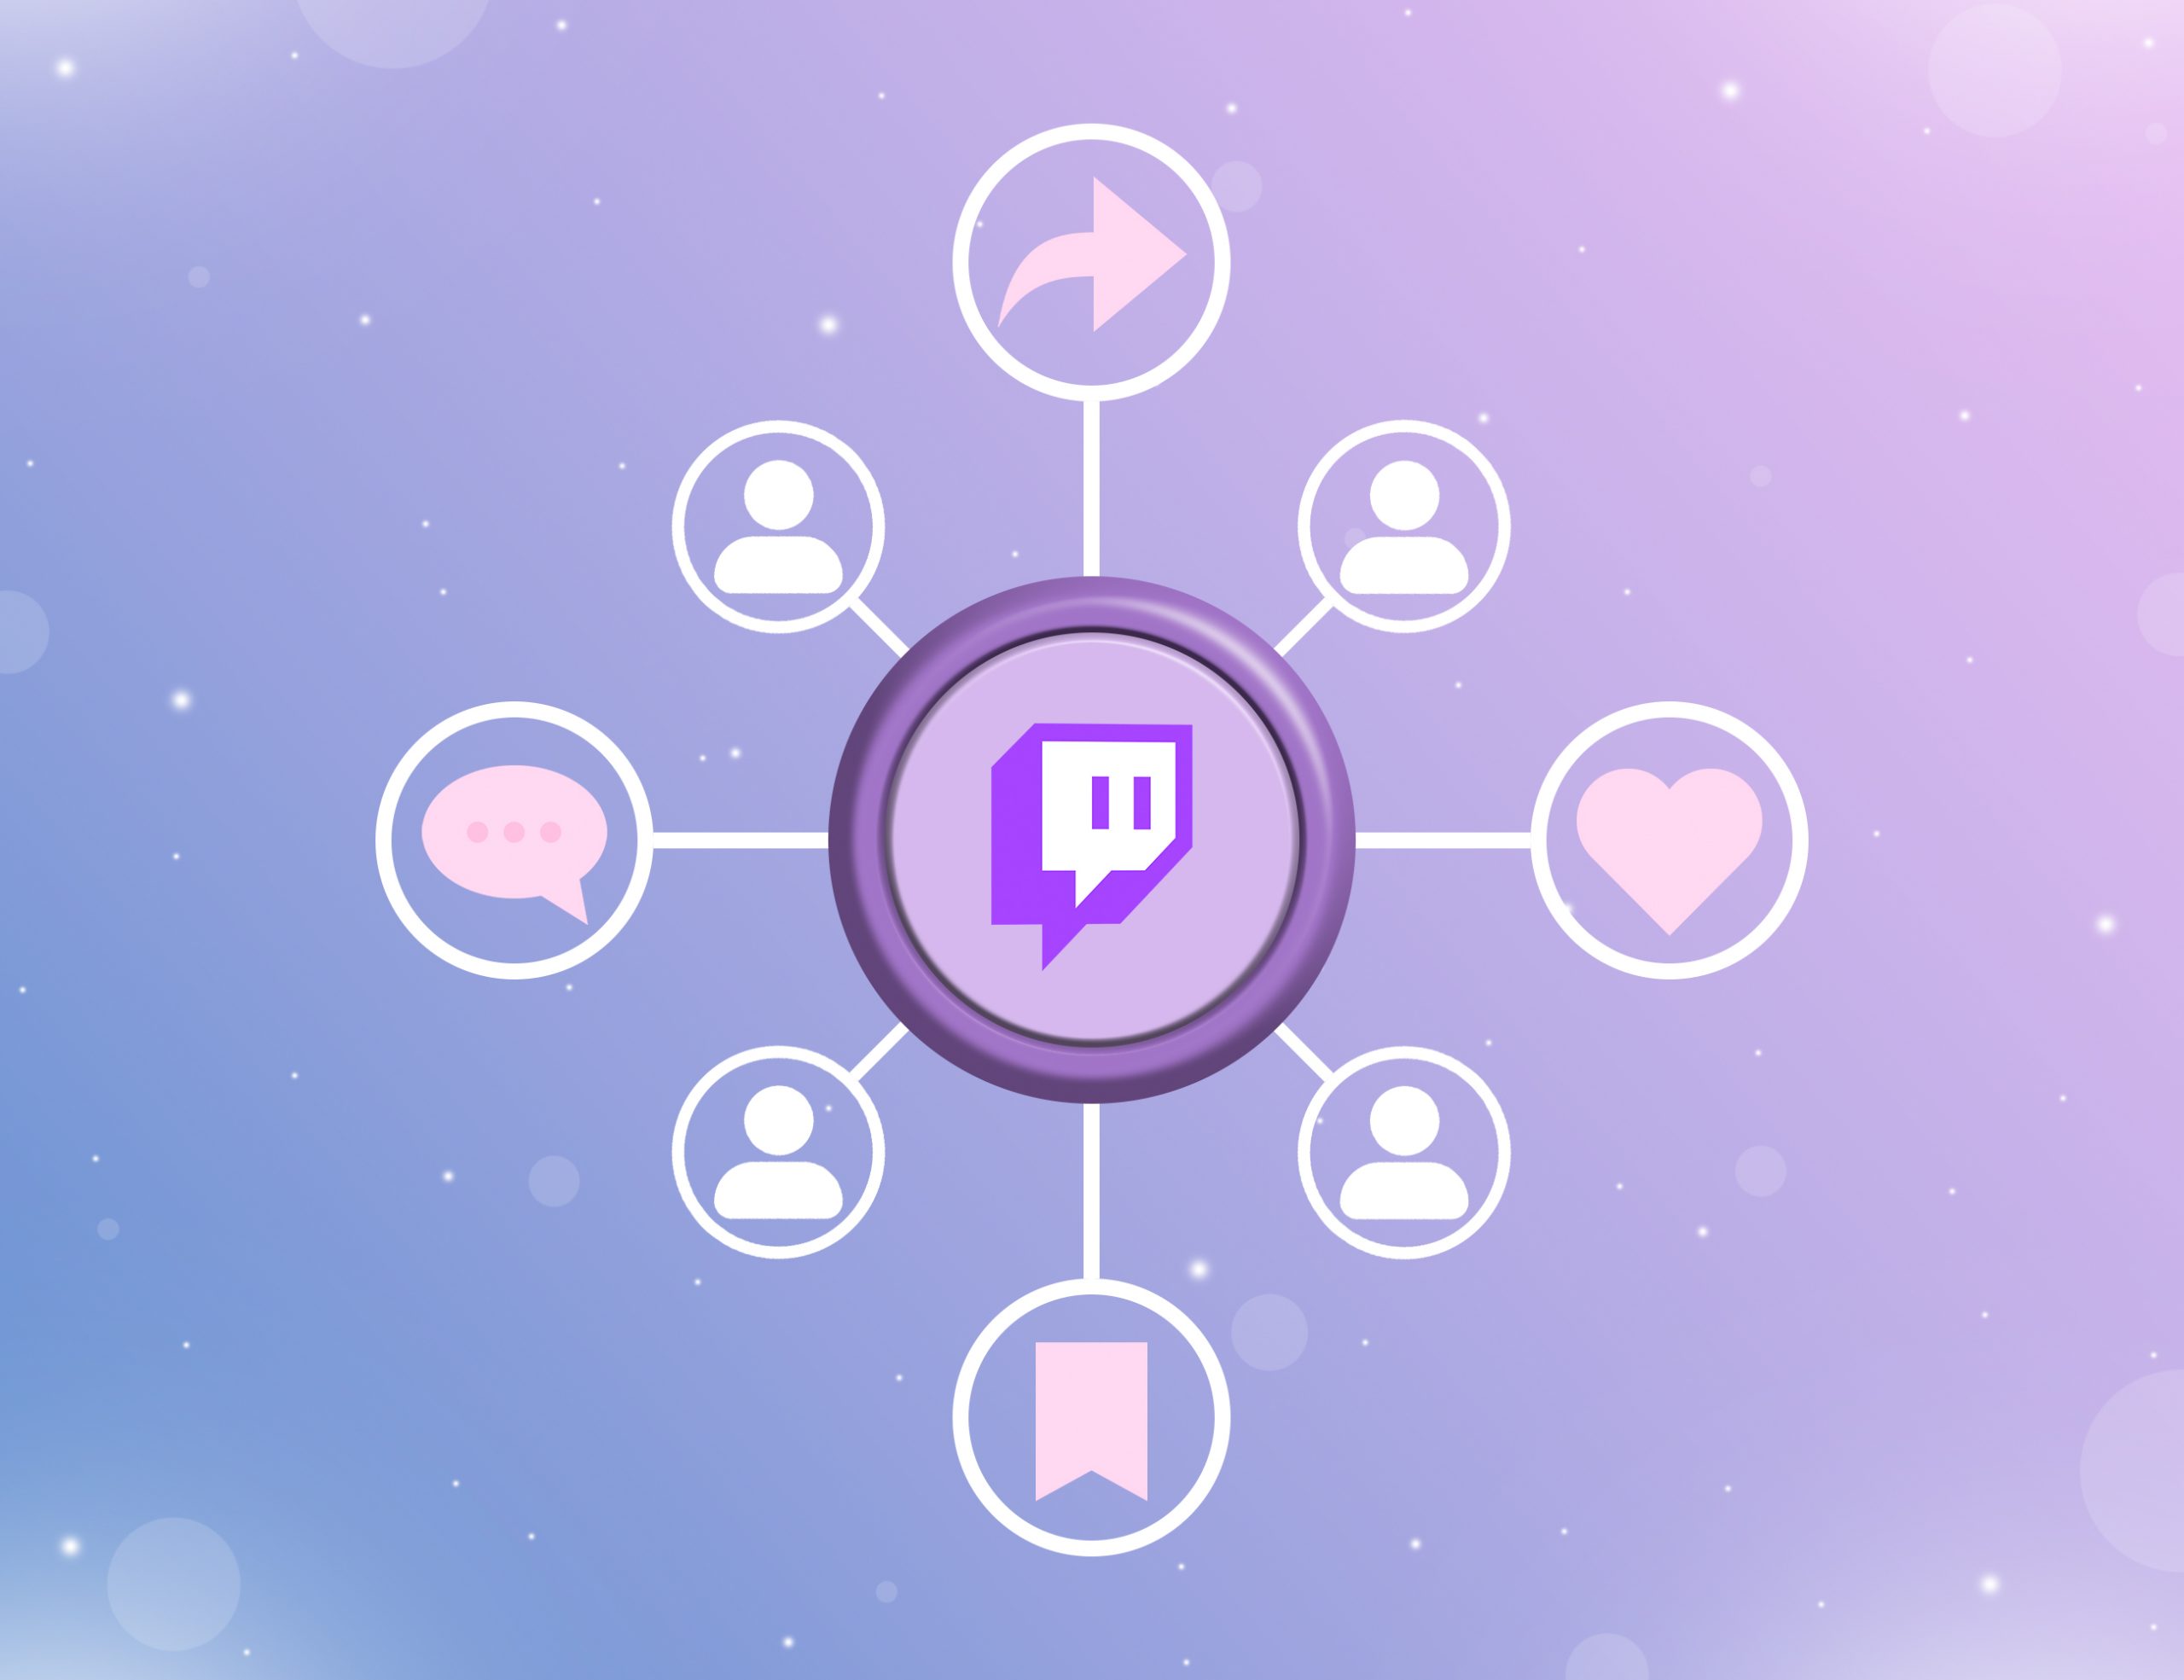 Implementing Twitch marketing in the right way